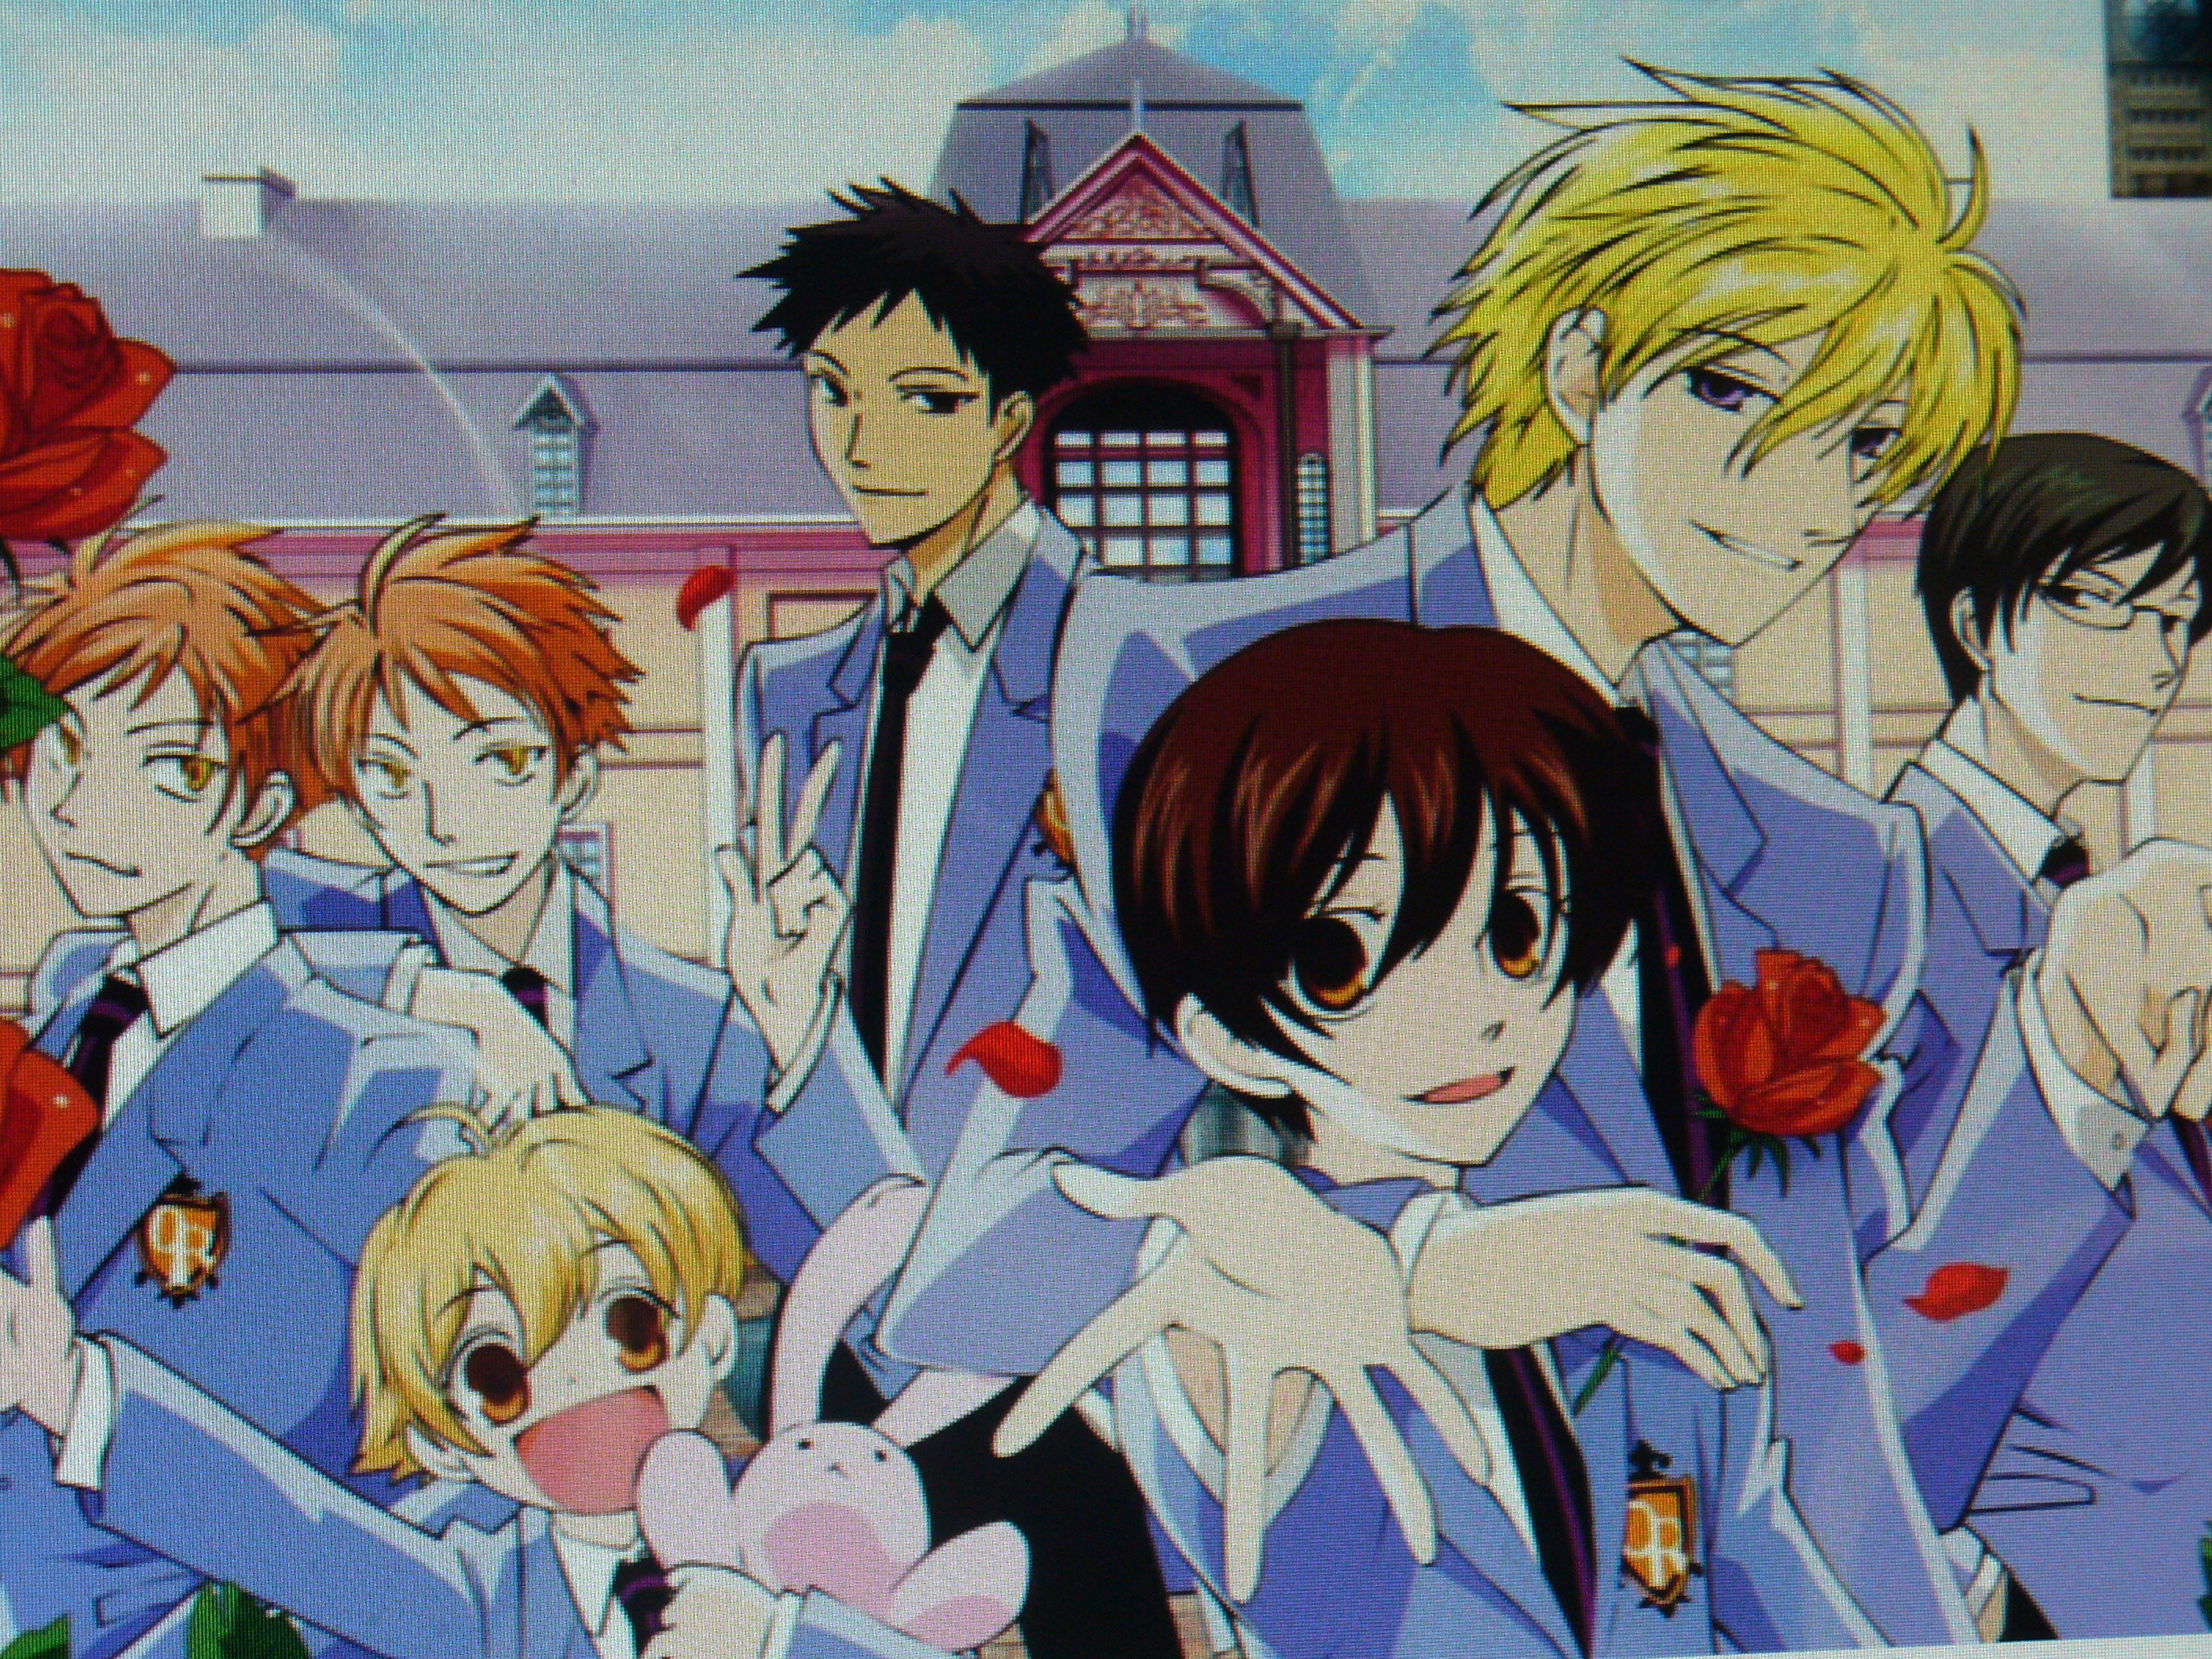 2816x2112 Ouran High School Host Club Club images The Host Club and Ouran Academy. HD  wallpaper and background photos